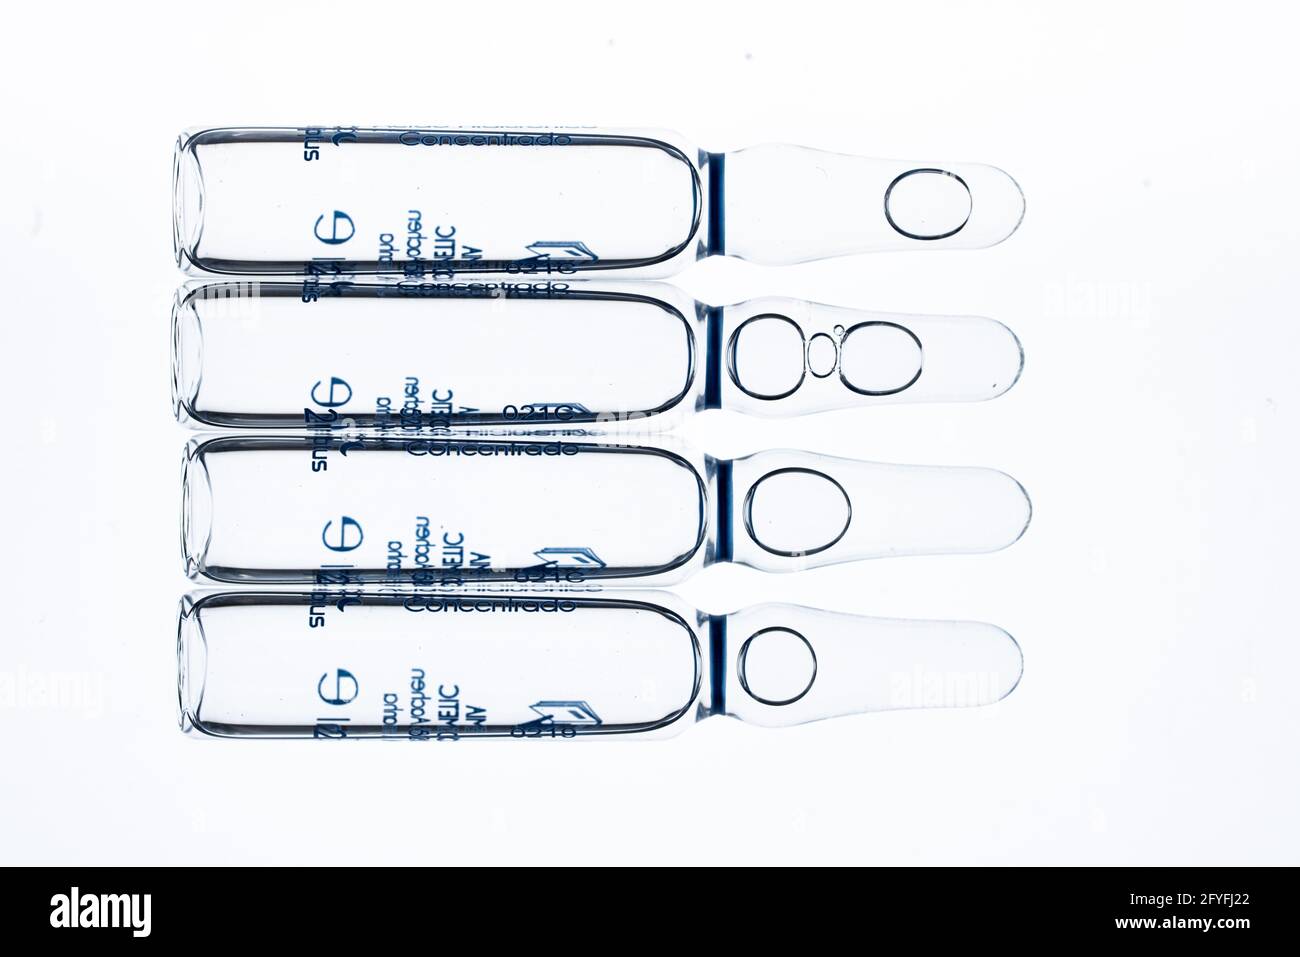 Glass ampoules of hyaluronic acid, hyaluronic acid is a polysaccharide found in the joint spaces, where it acts as a lubricant, and is also a major co Stock Photo